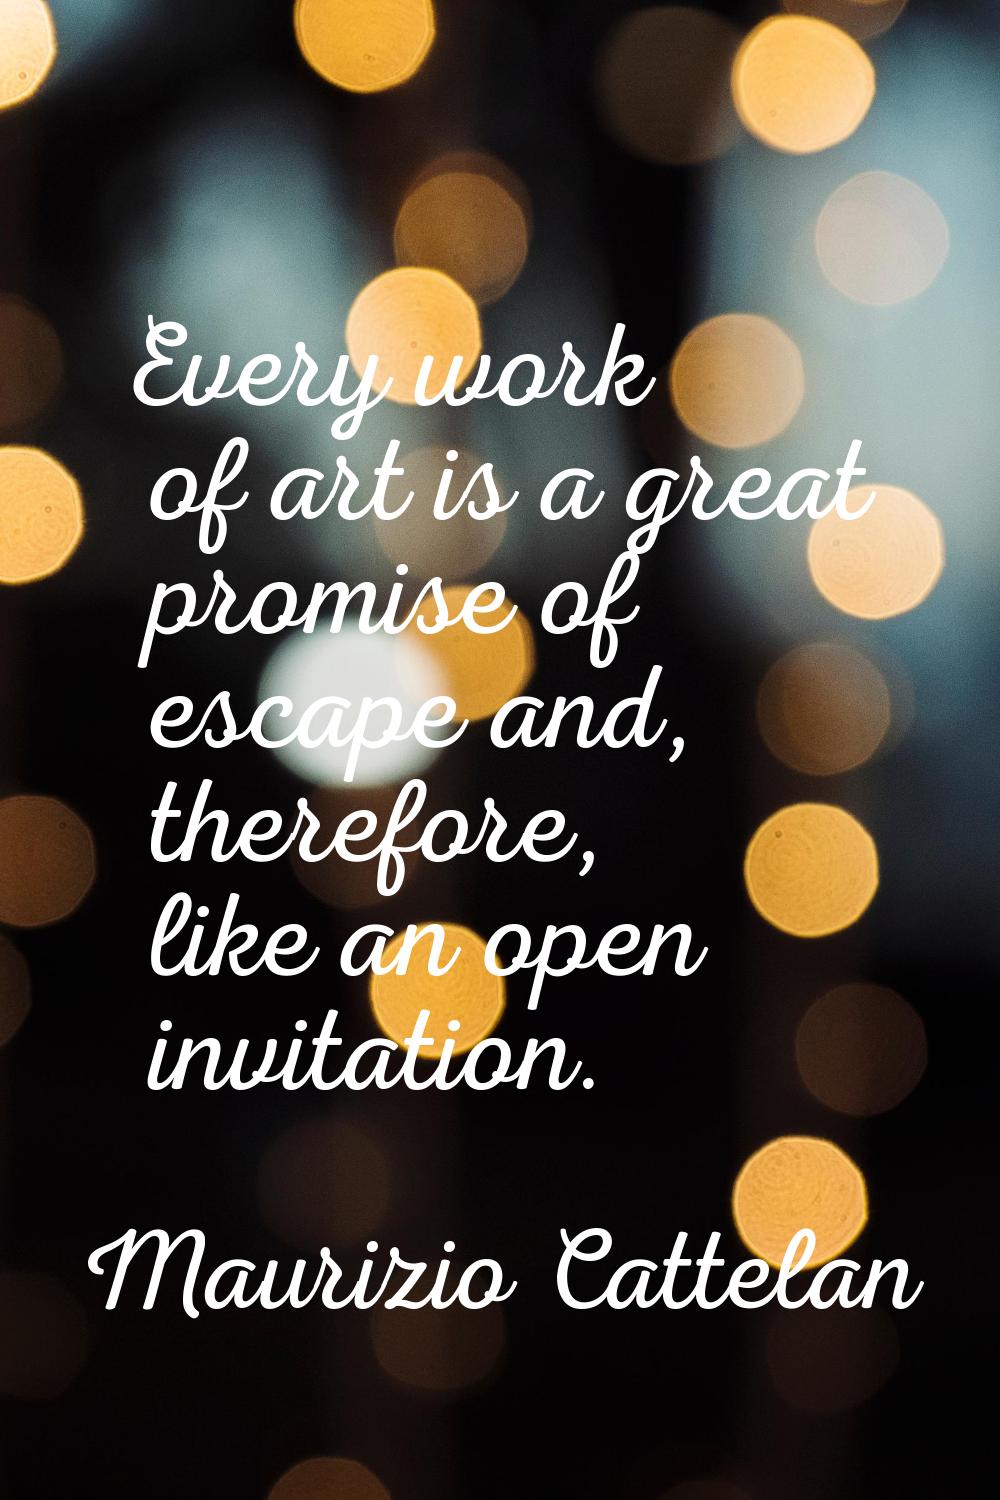 Every work of art is a great promise of escape and, therefore, like an open invitation.